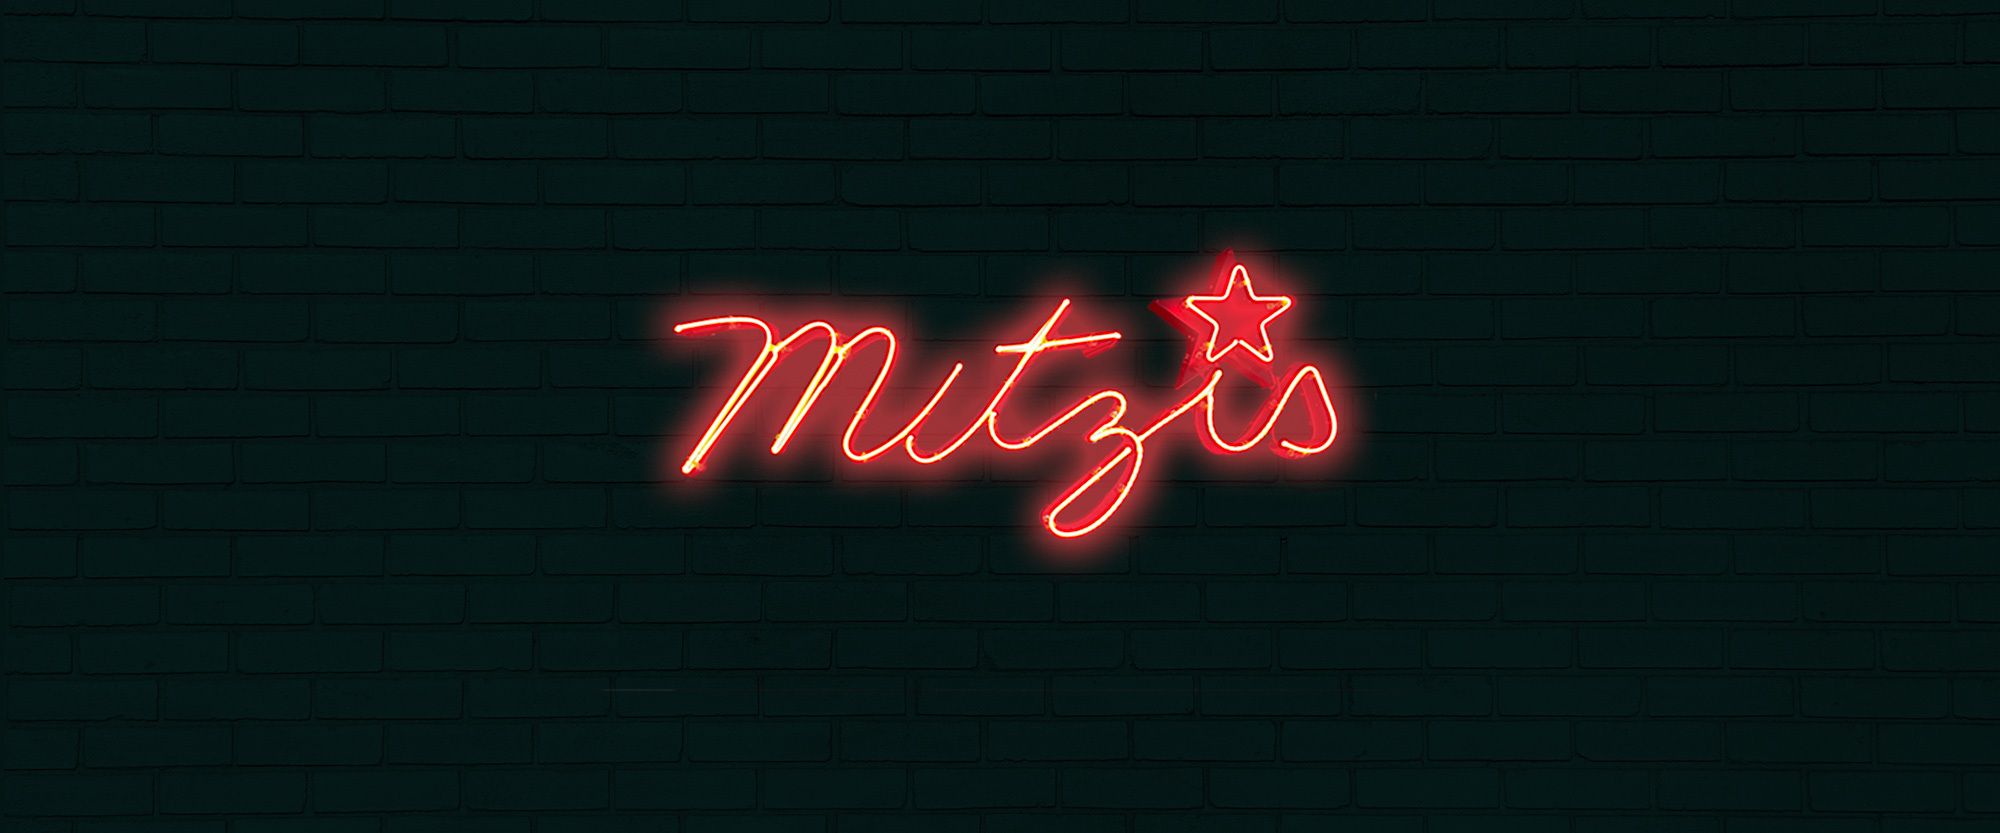 A photo of a neon sign reading "Mitzi's"